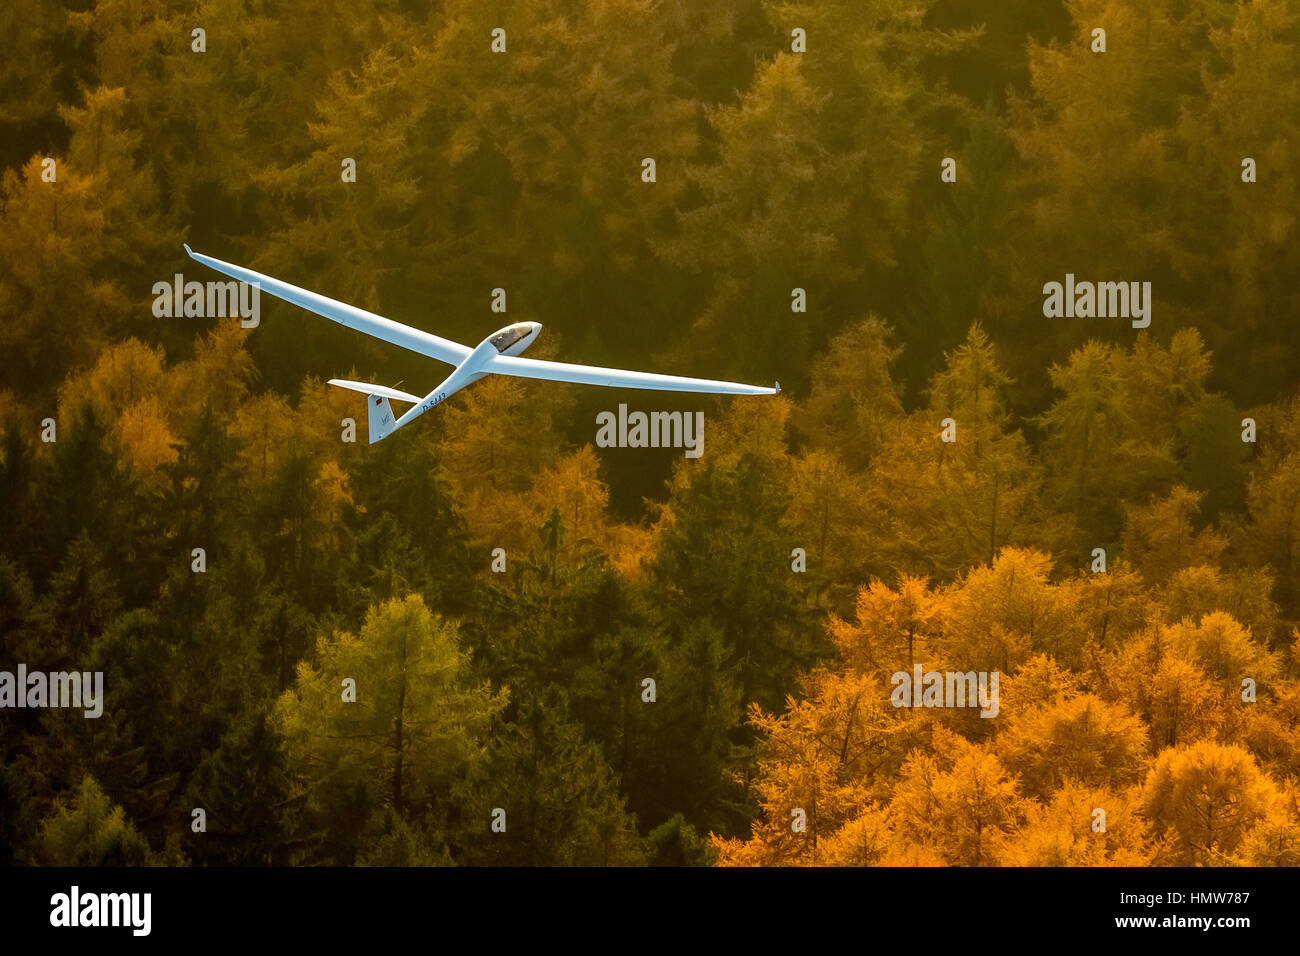 Glider, two-seater, Duo Discus D-5443 over autumn forest, near Arnsberg, Ruhr district, North Rhine-Westphalia, Germany Stock Photo